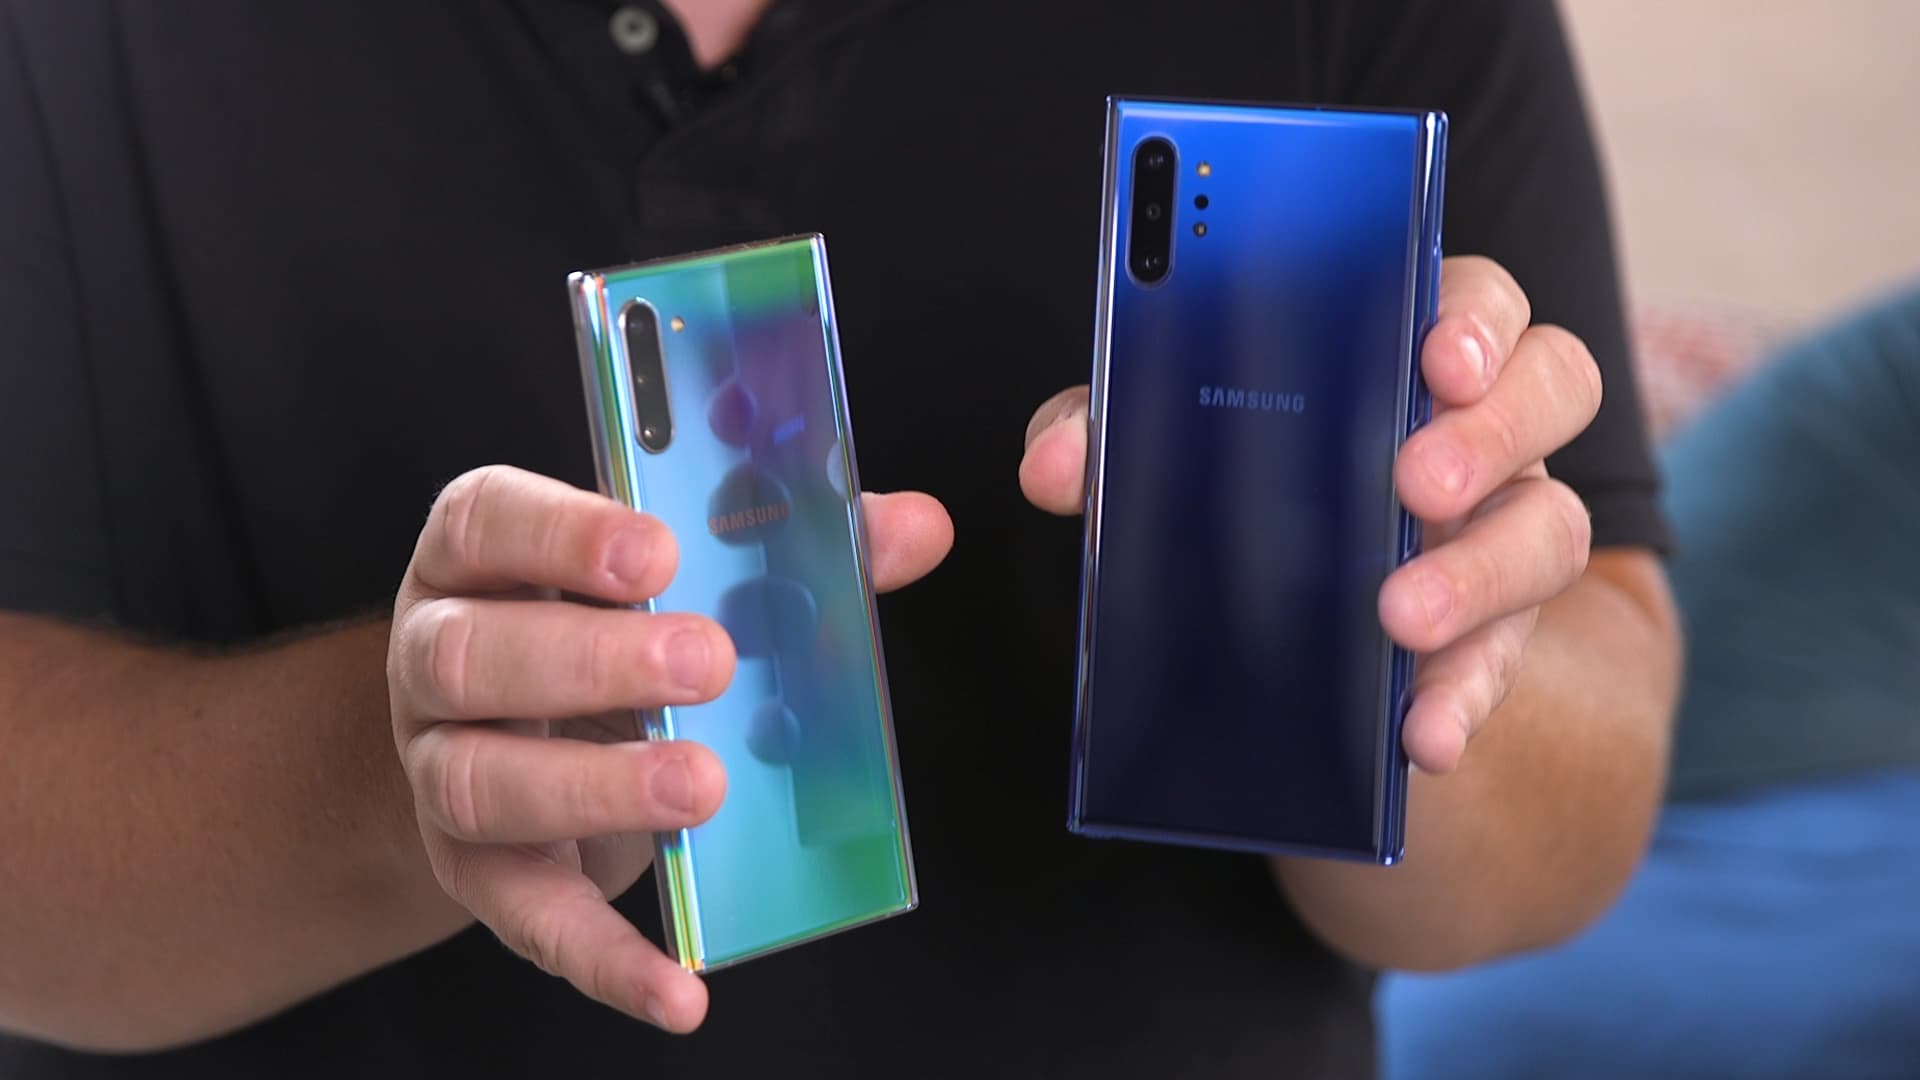 Samsung's new Galaxy Note 10 lineup first impressions